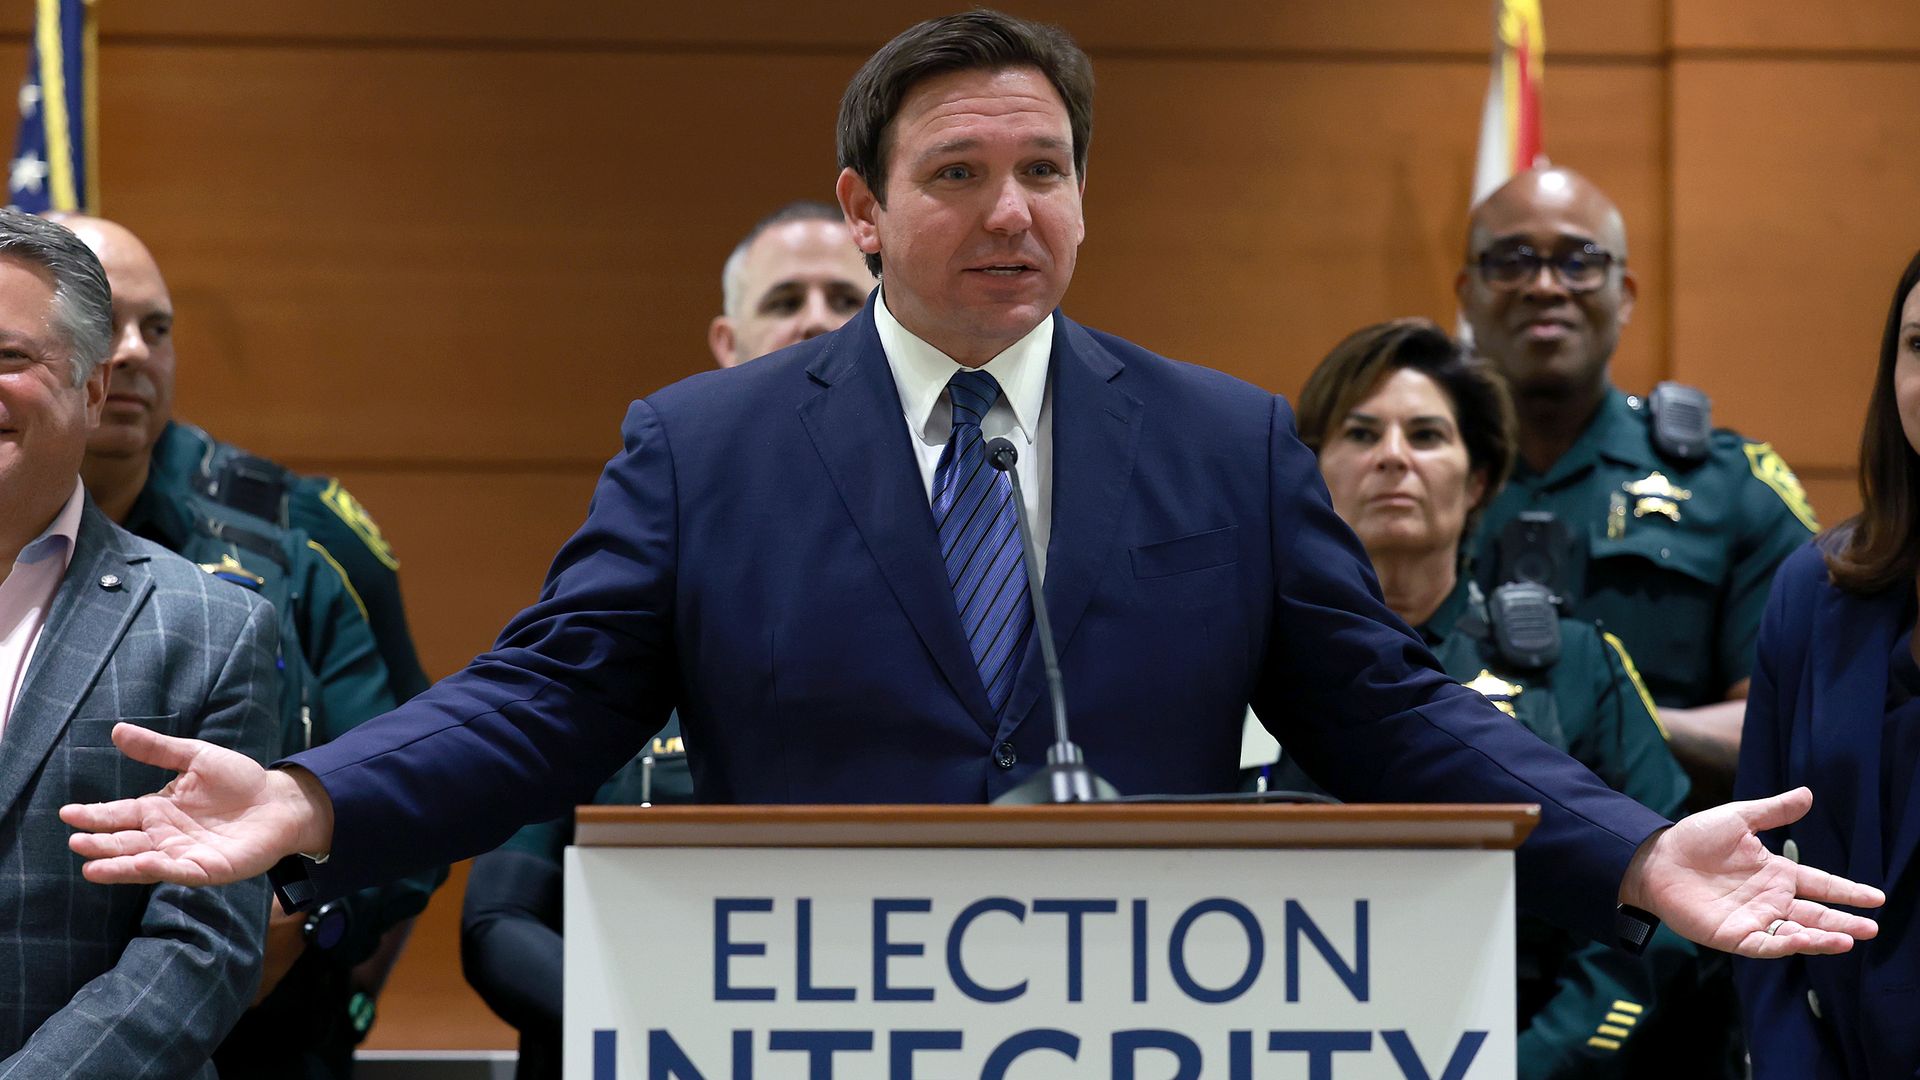 Florida Gov. Ron DeSantis speaks during a press conference at the Broward County Courthouse in Fort Lauderdale.